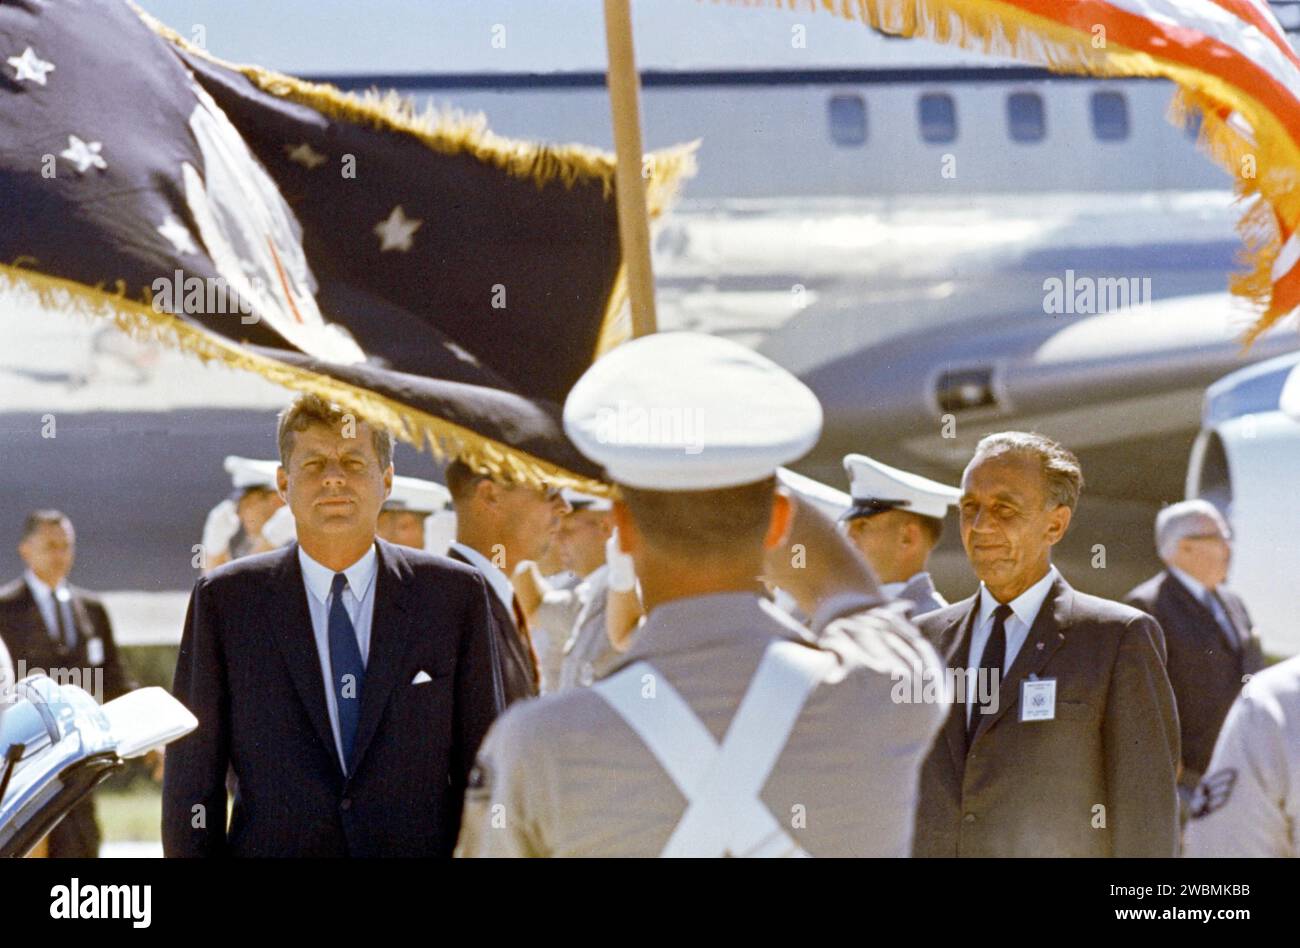 CAPE CANAVERAL, FLA. -- After arrival at Cape Canaveral Missile Test Annex, Skid Strip, President John F. Kennedy left is welcomed by a Color Guard. Dr. Kurt Debus is at right. The President is touring Complex 37, Cape Canaveral Missile Test Annex. Stock Photo